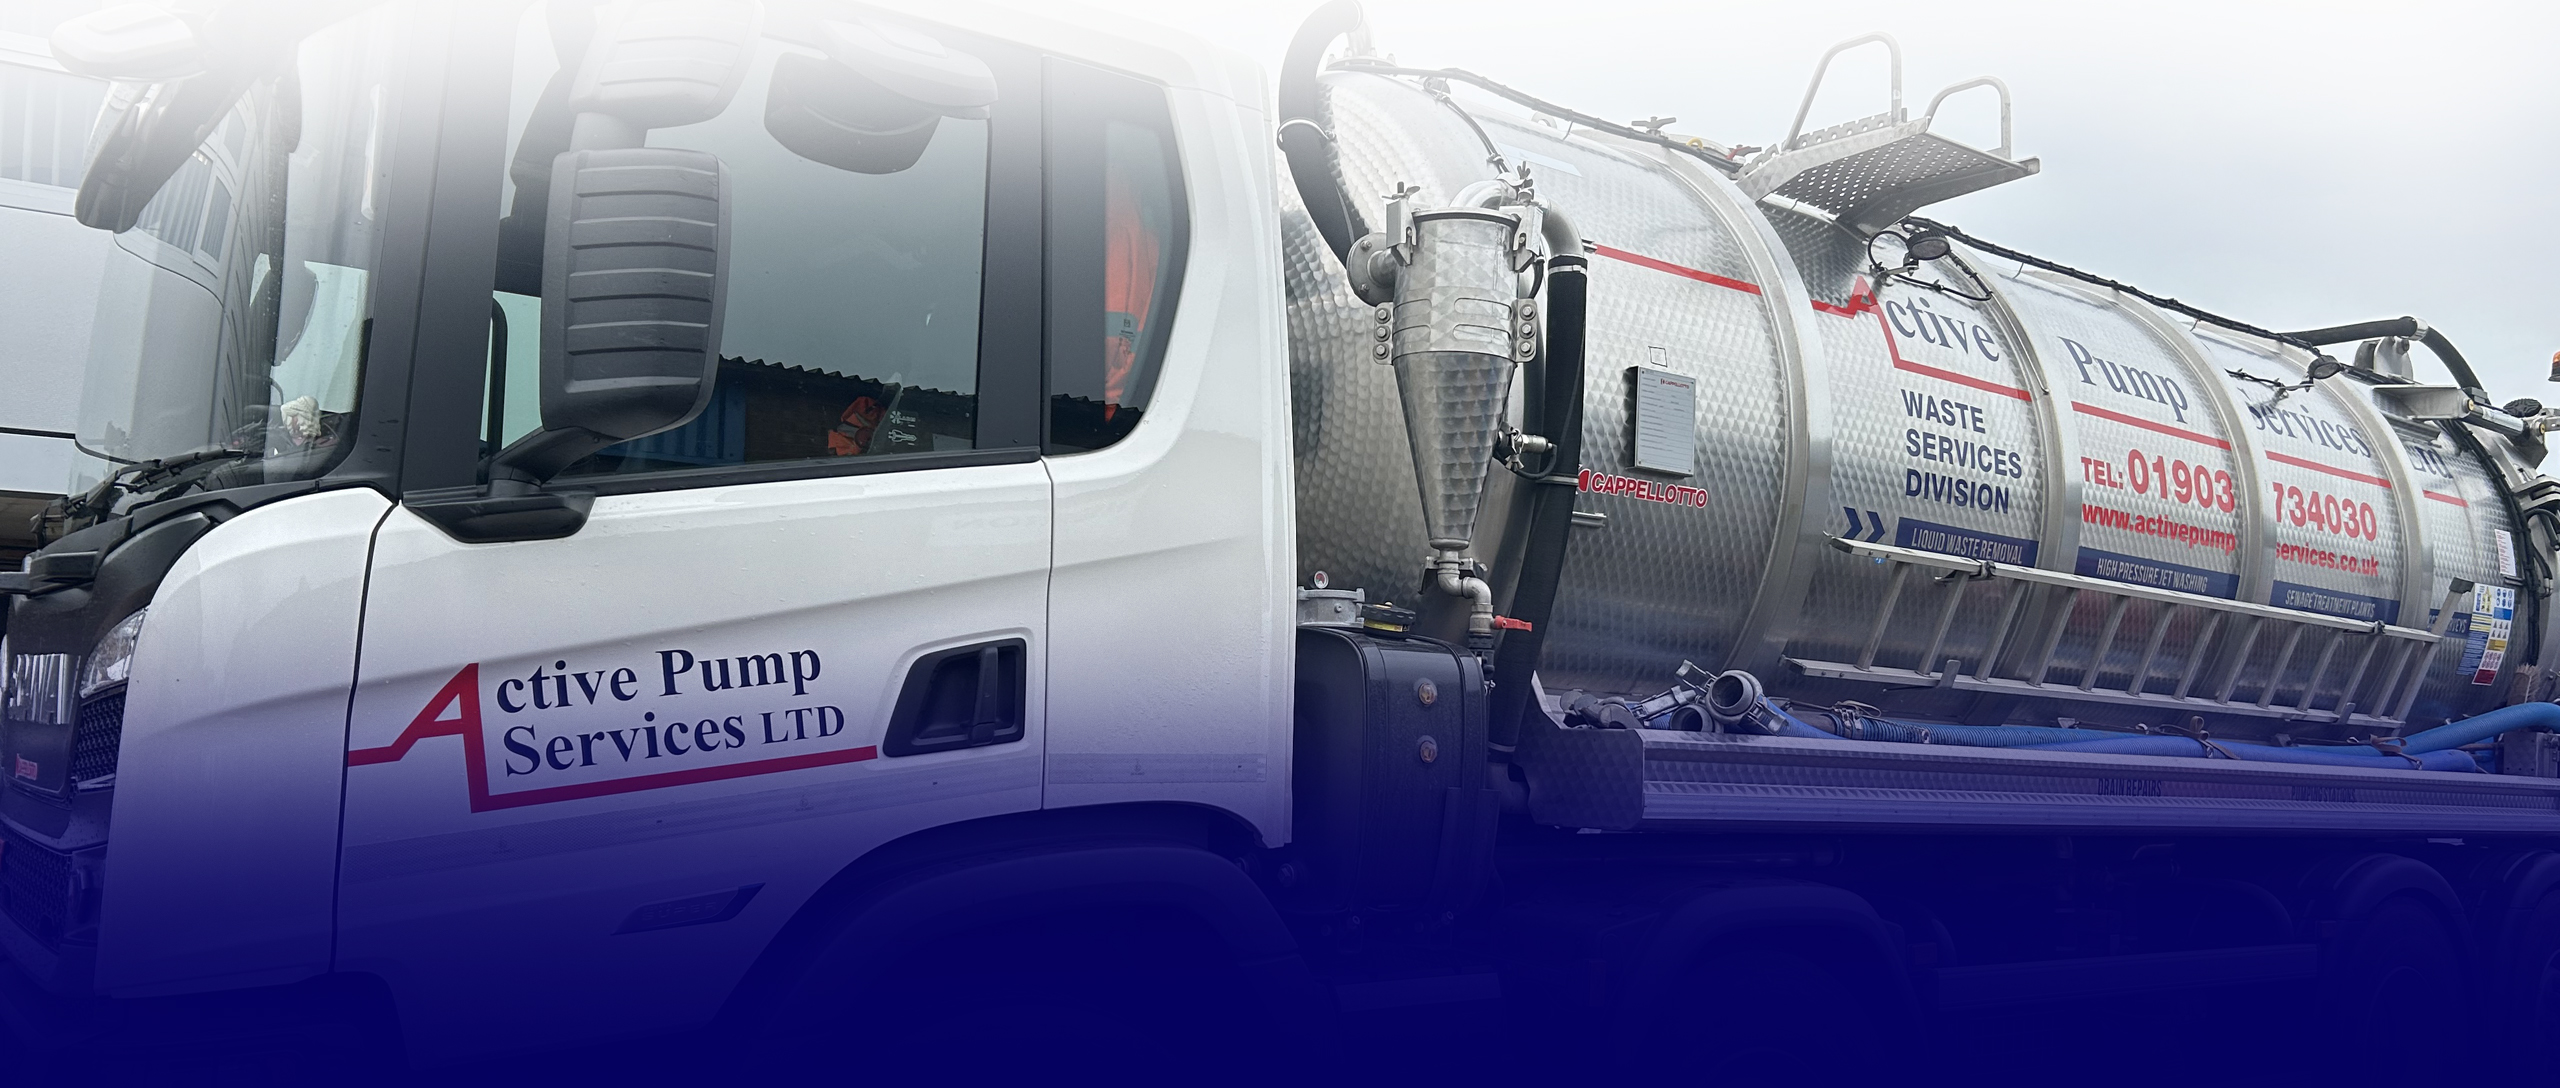 Quick response for all your pumping, plumbing, heating and renewable solutions